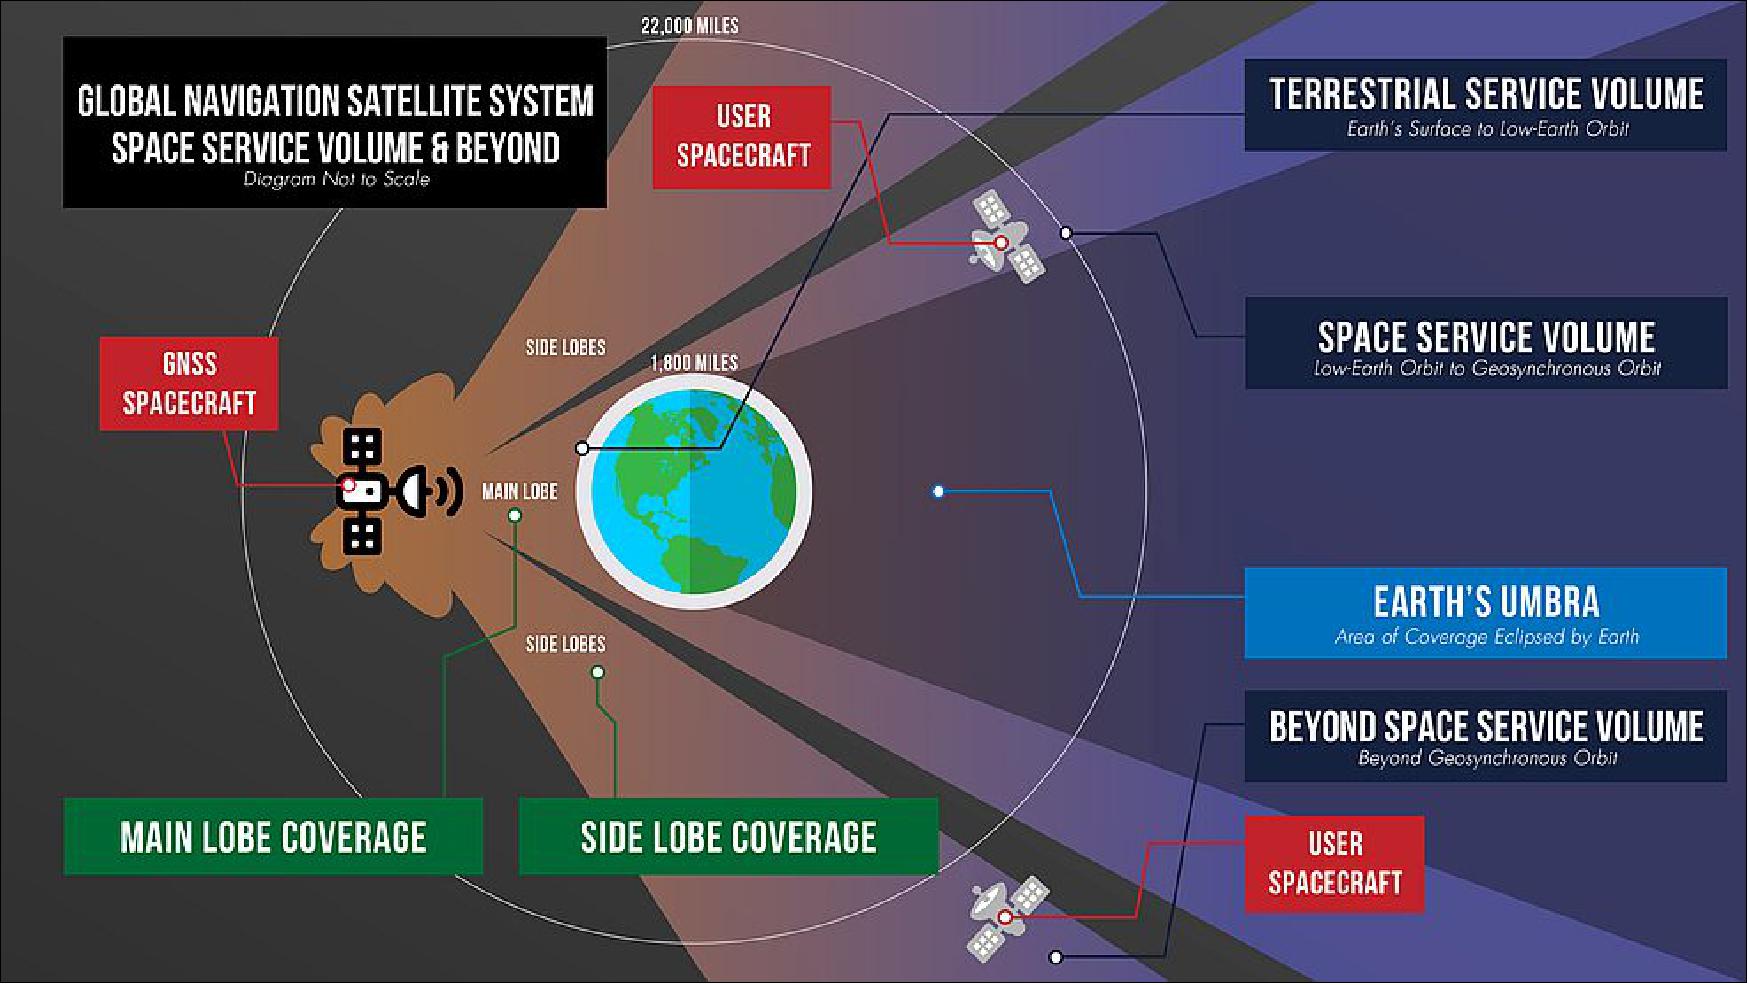 Figure 29: A graphic detailing the different areas of GNSS coverage (image credit: NASA)